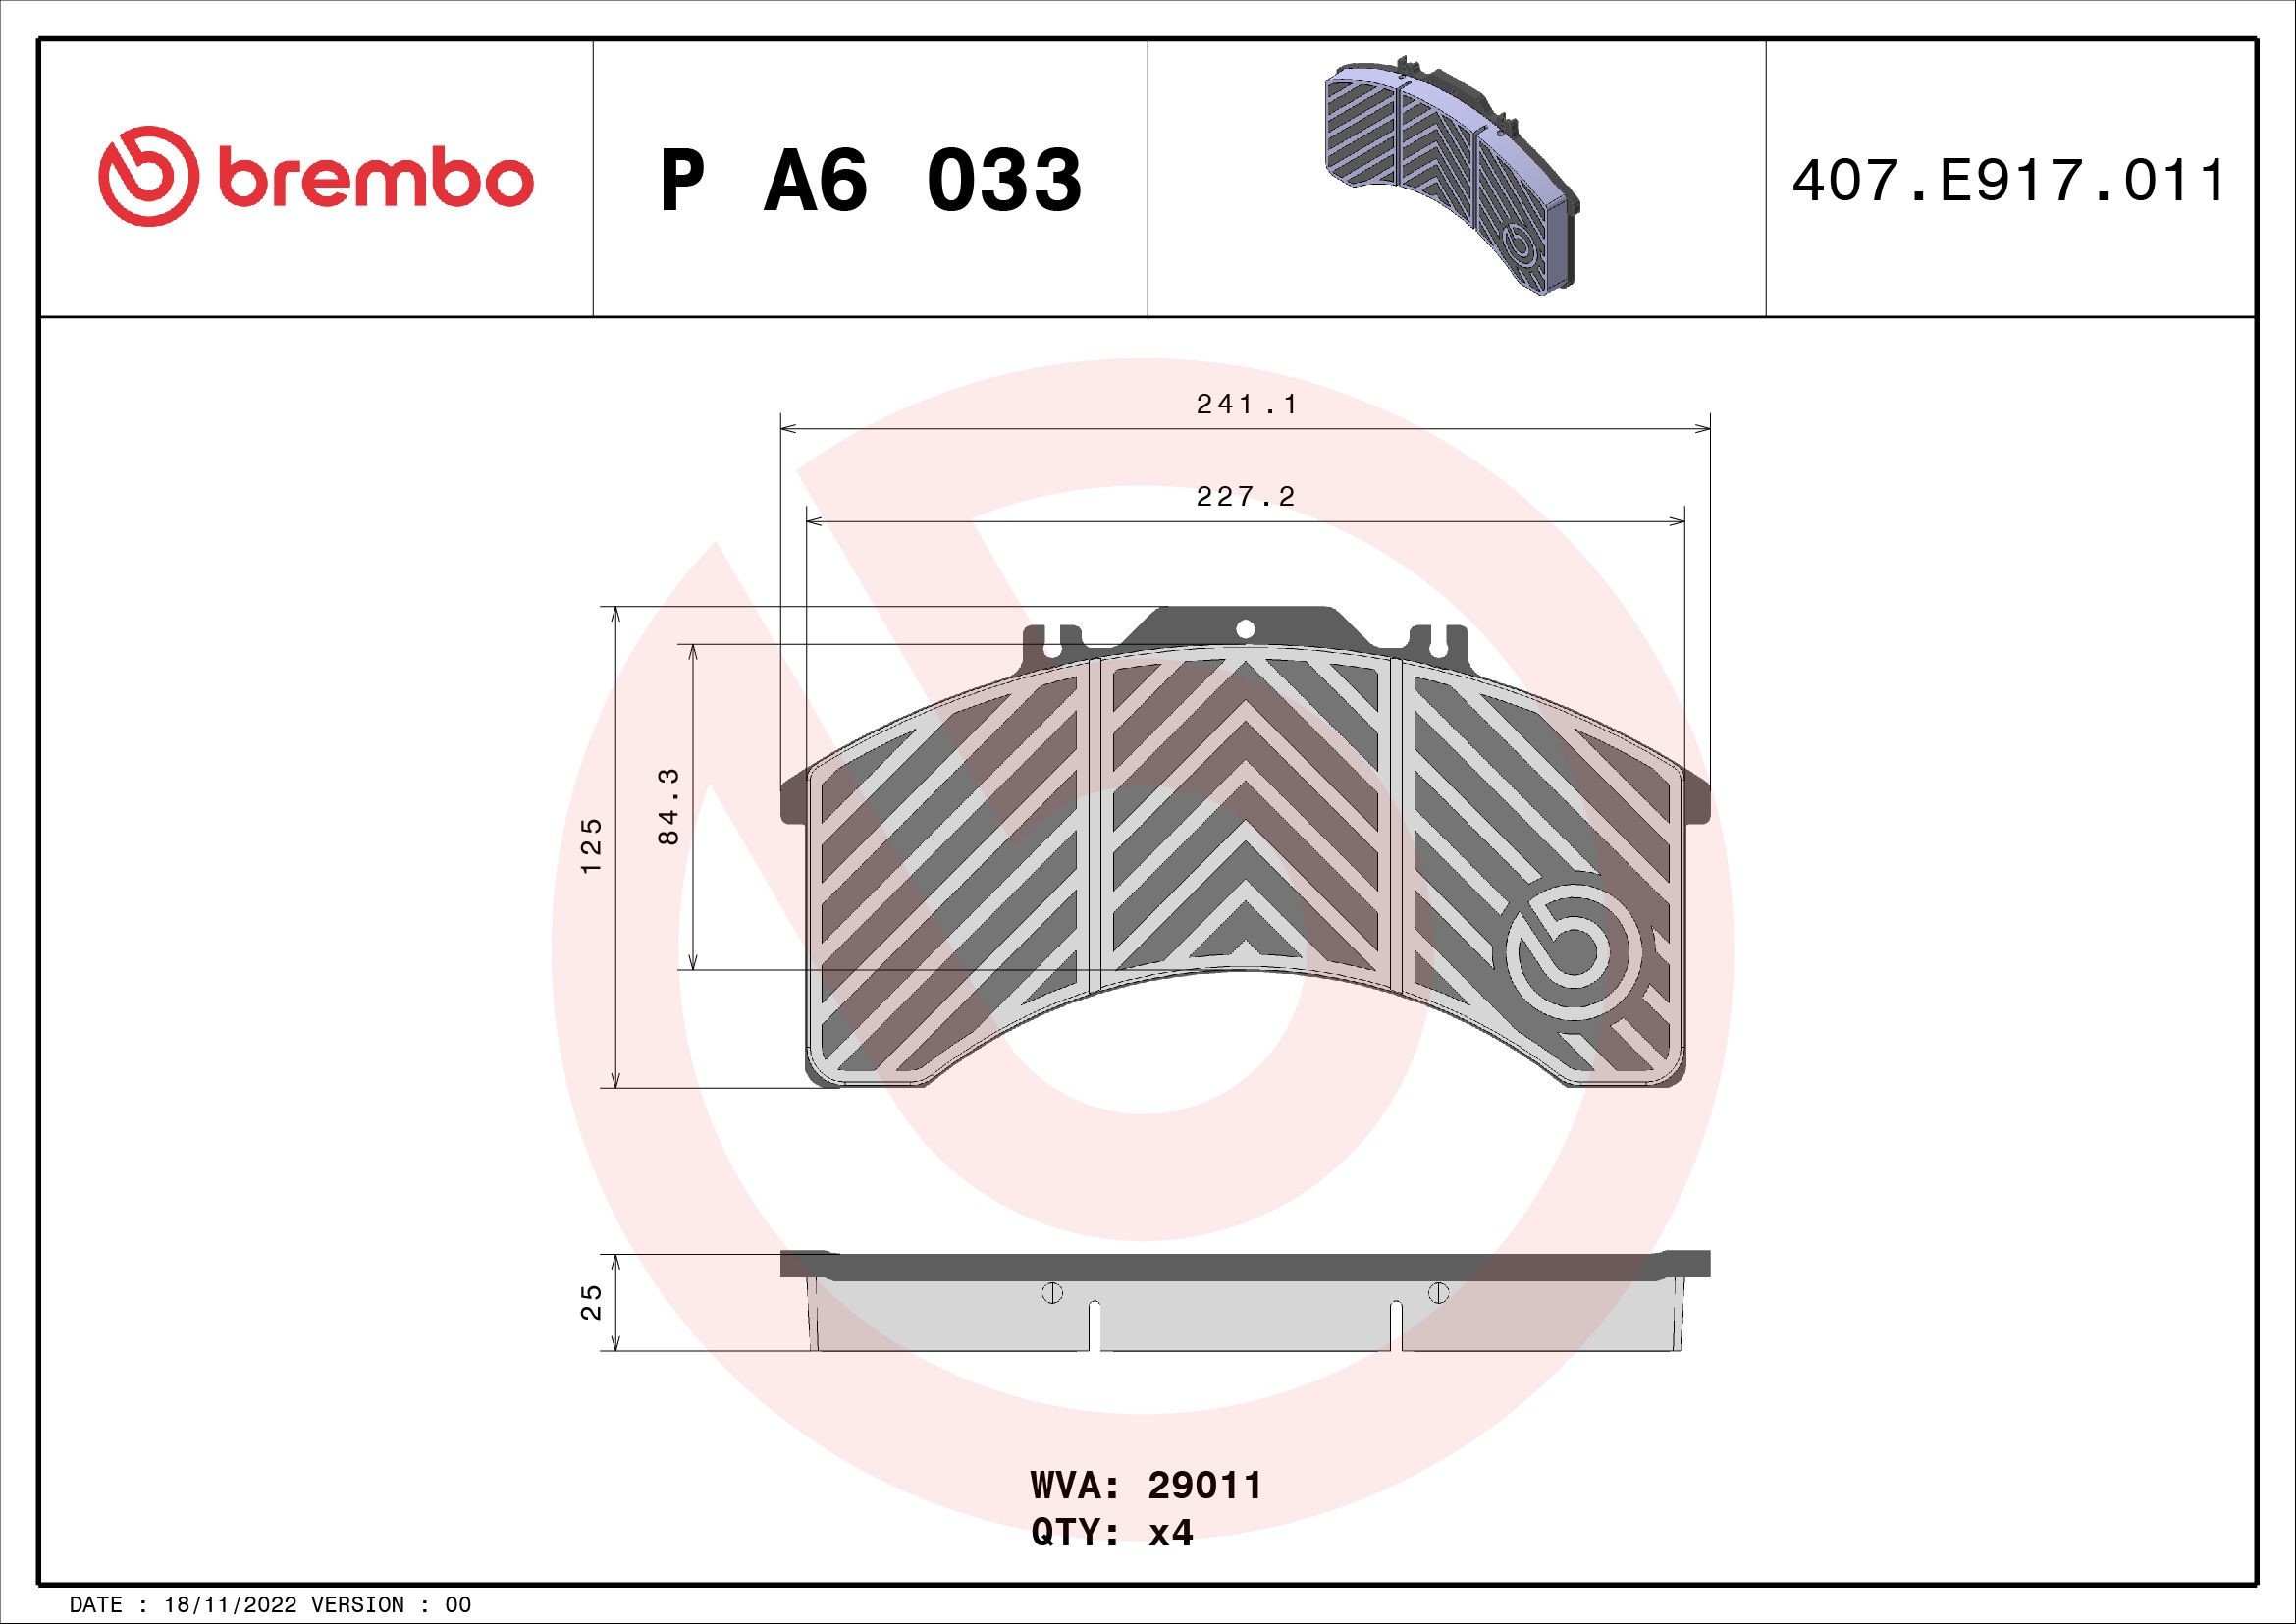 P A6 033 BREMBO Bremsbeläge IVECO EuroTech MT